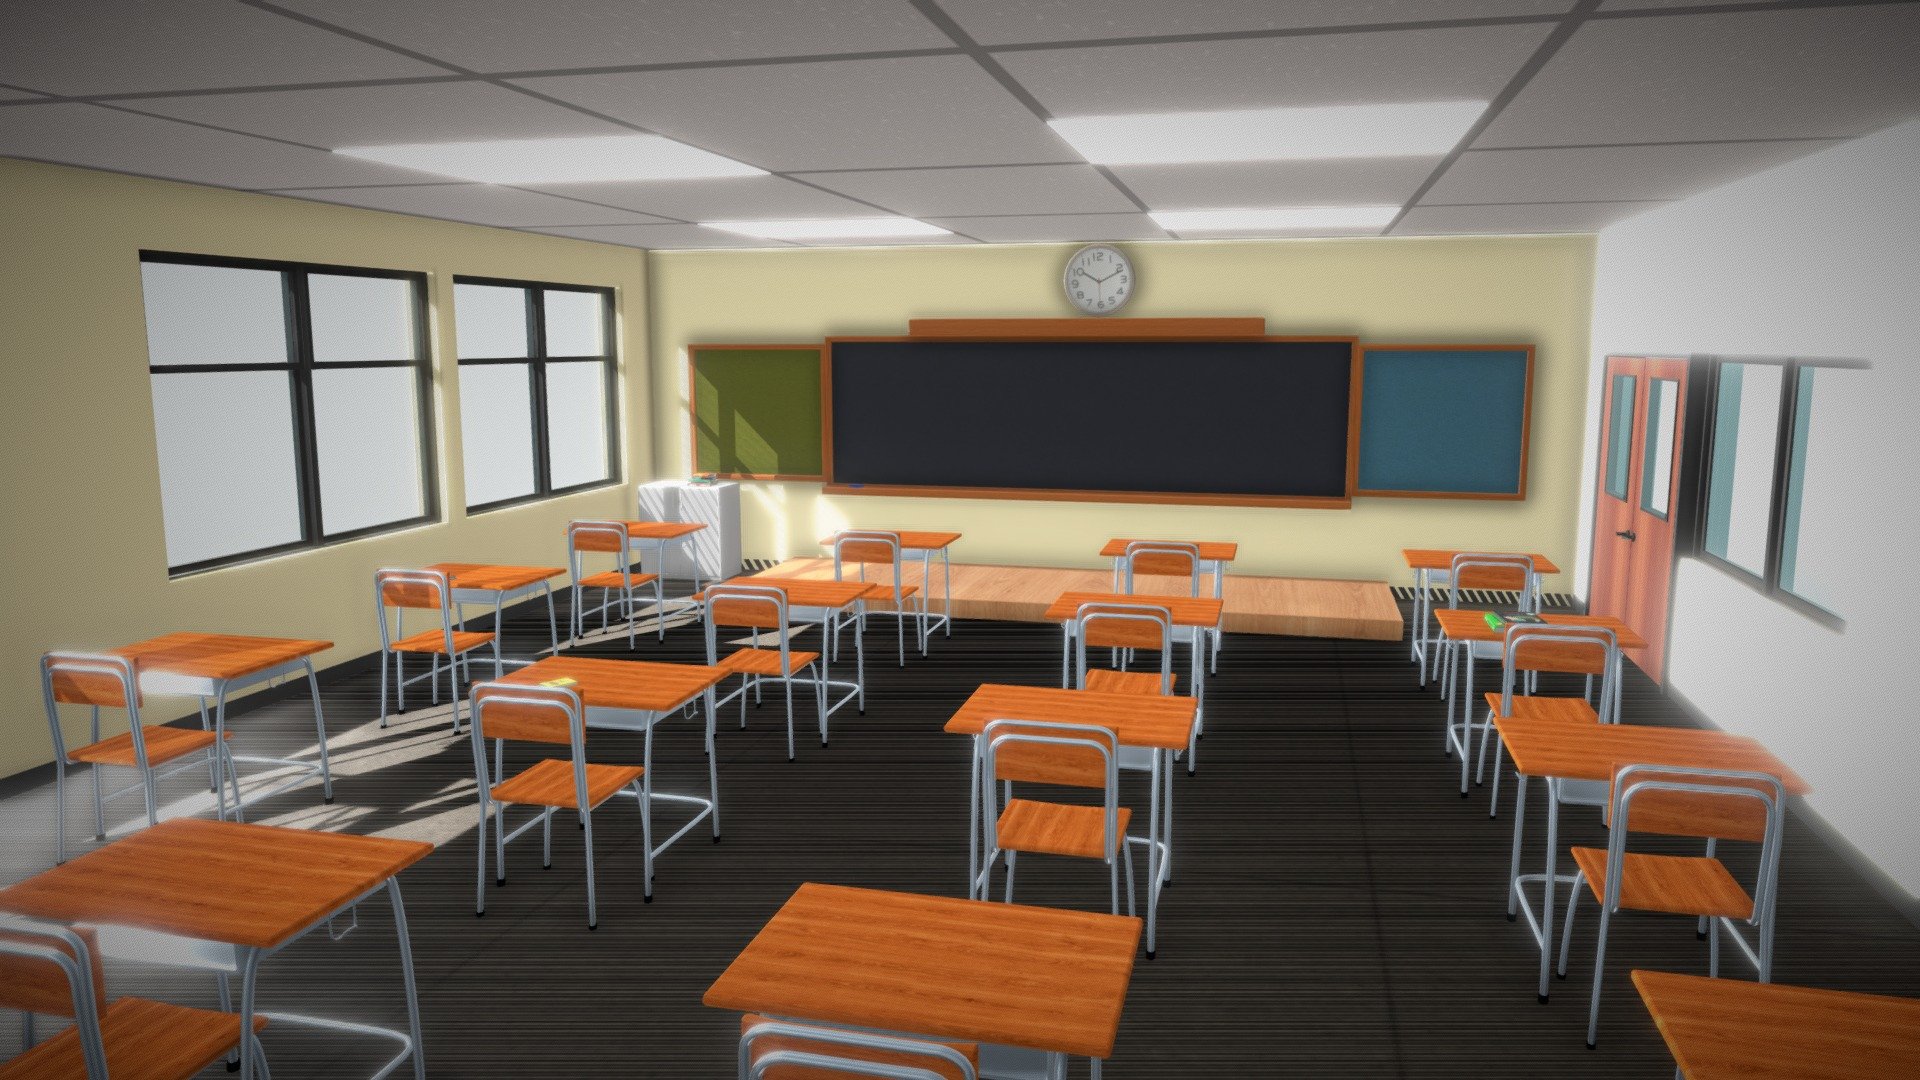 Classroom Interior
The Package is high optimized, Created with Altasted Map for quick rendering.

Pack Features:
- FBX format
- Clean and worn textures/materials for all objects.
- Pack for your Desktop, VR or Mobile projects.
- Most textures are 2k
- All textures are PNG format.

All source files are included in this package.

Bright Vision Game is a team of 3D Game artists with over a decade of experience in the field 3d model